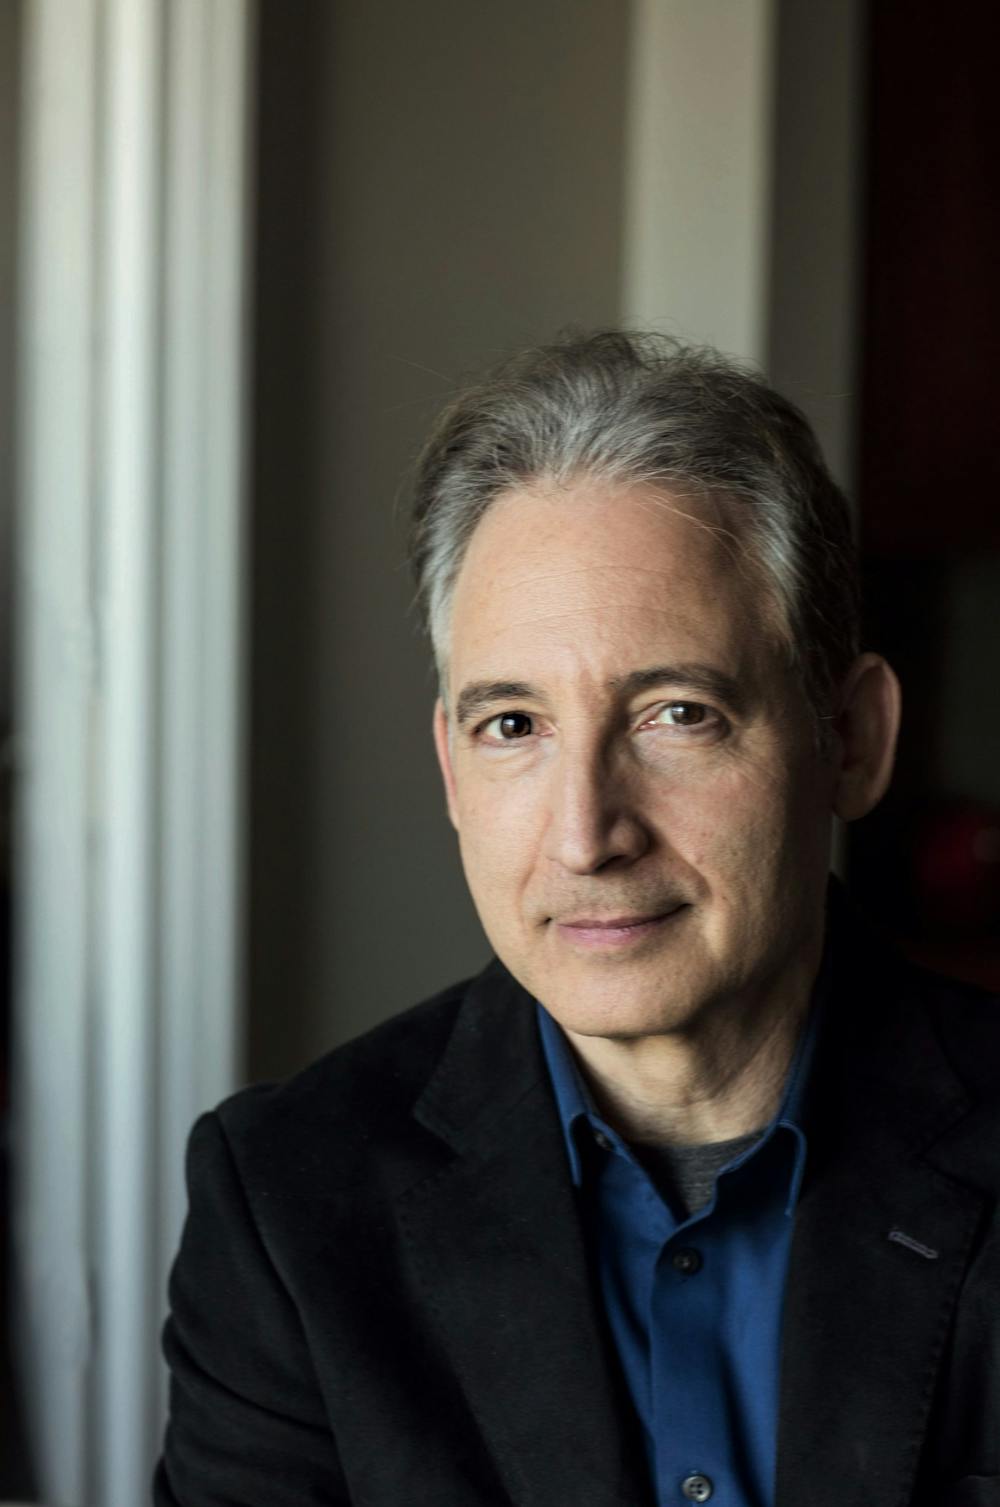 Brian Greene, professor of mathematics and physics at Columbia University, explained humankind’s search for meaning through examining the history and future of the universe at his recent talk at the Paramount Theater.&nbsp;